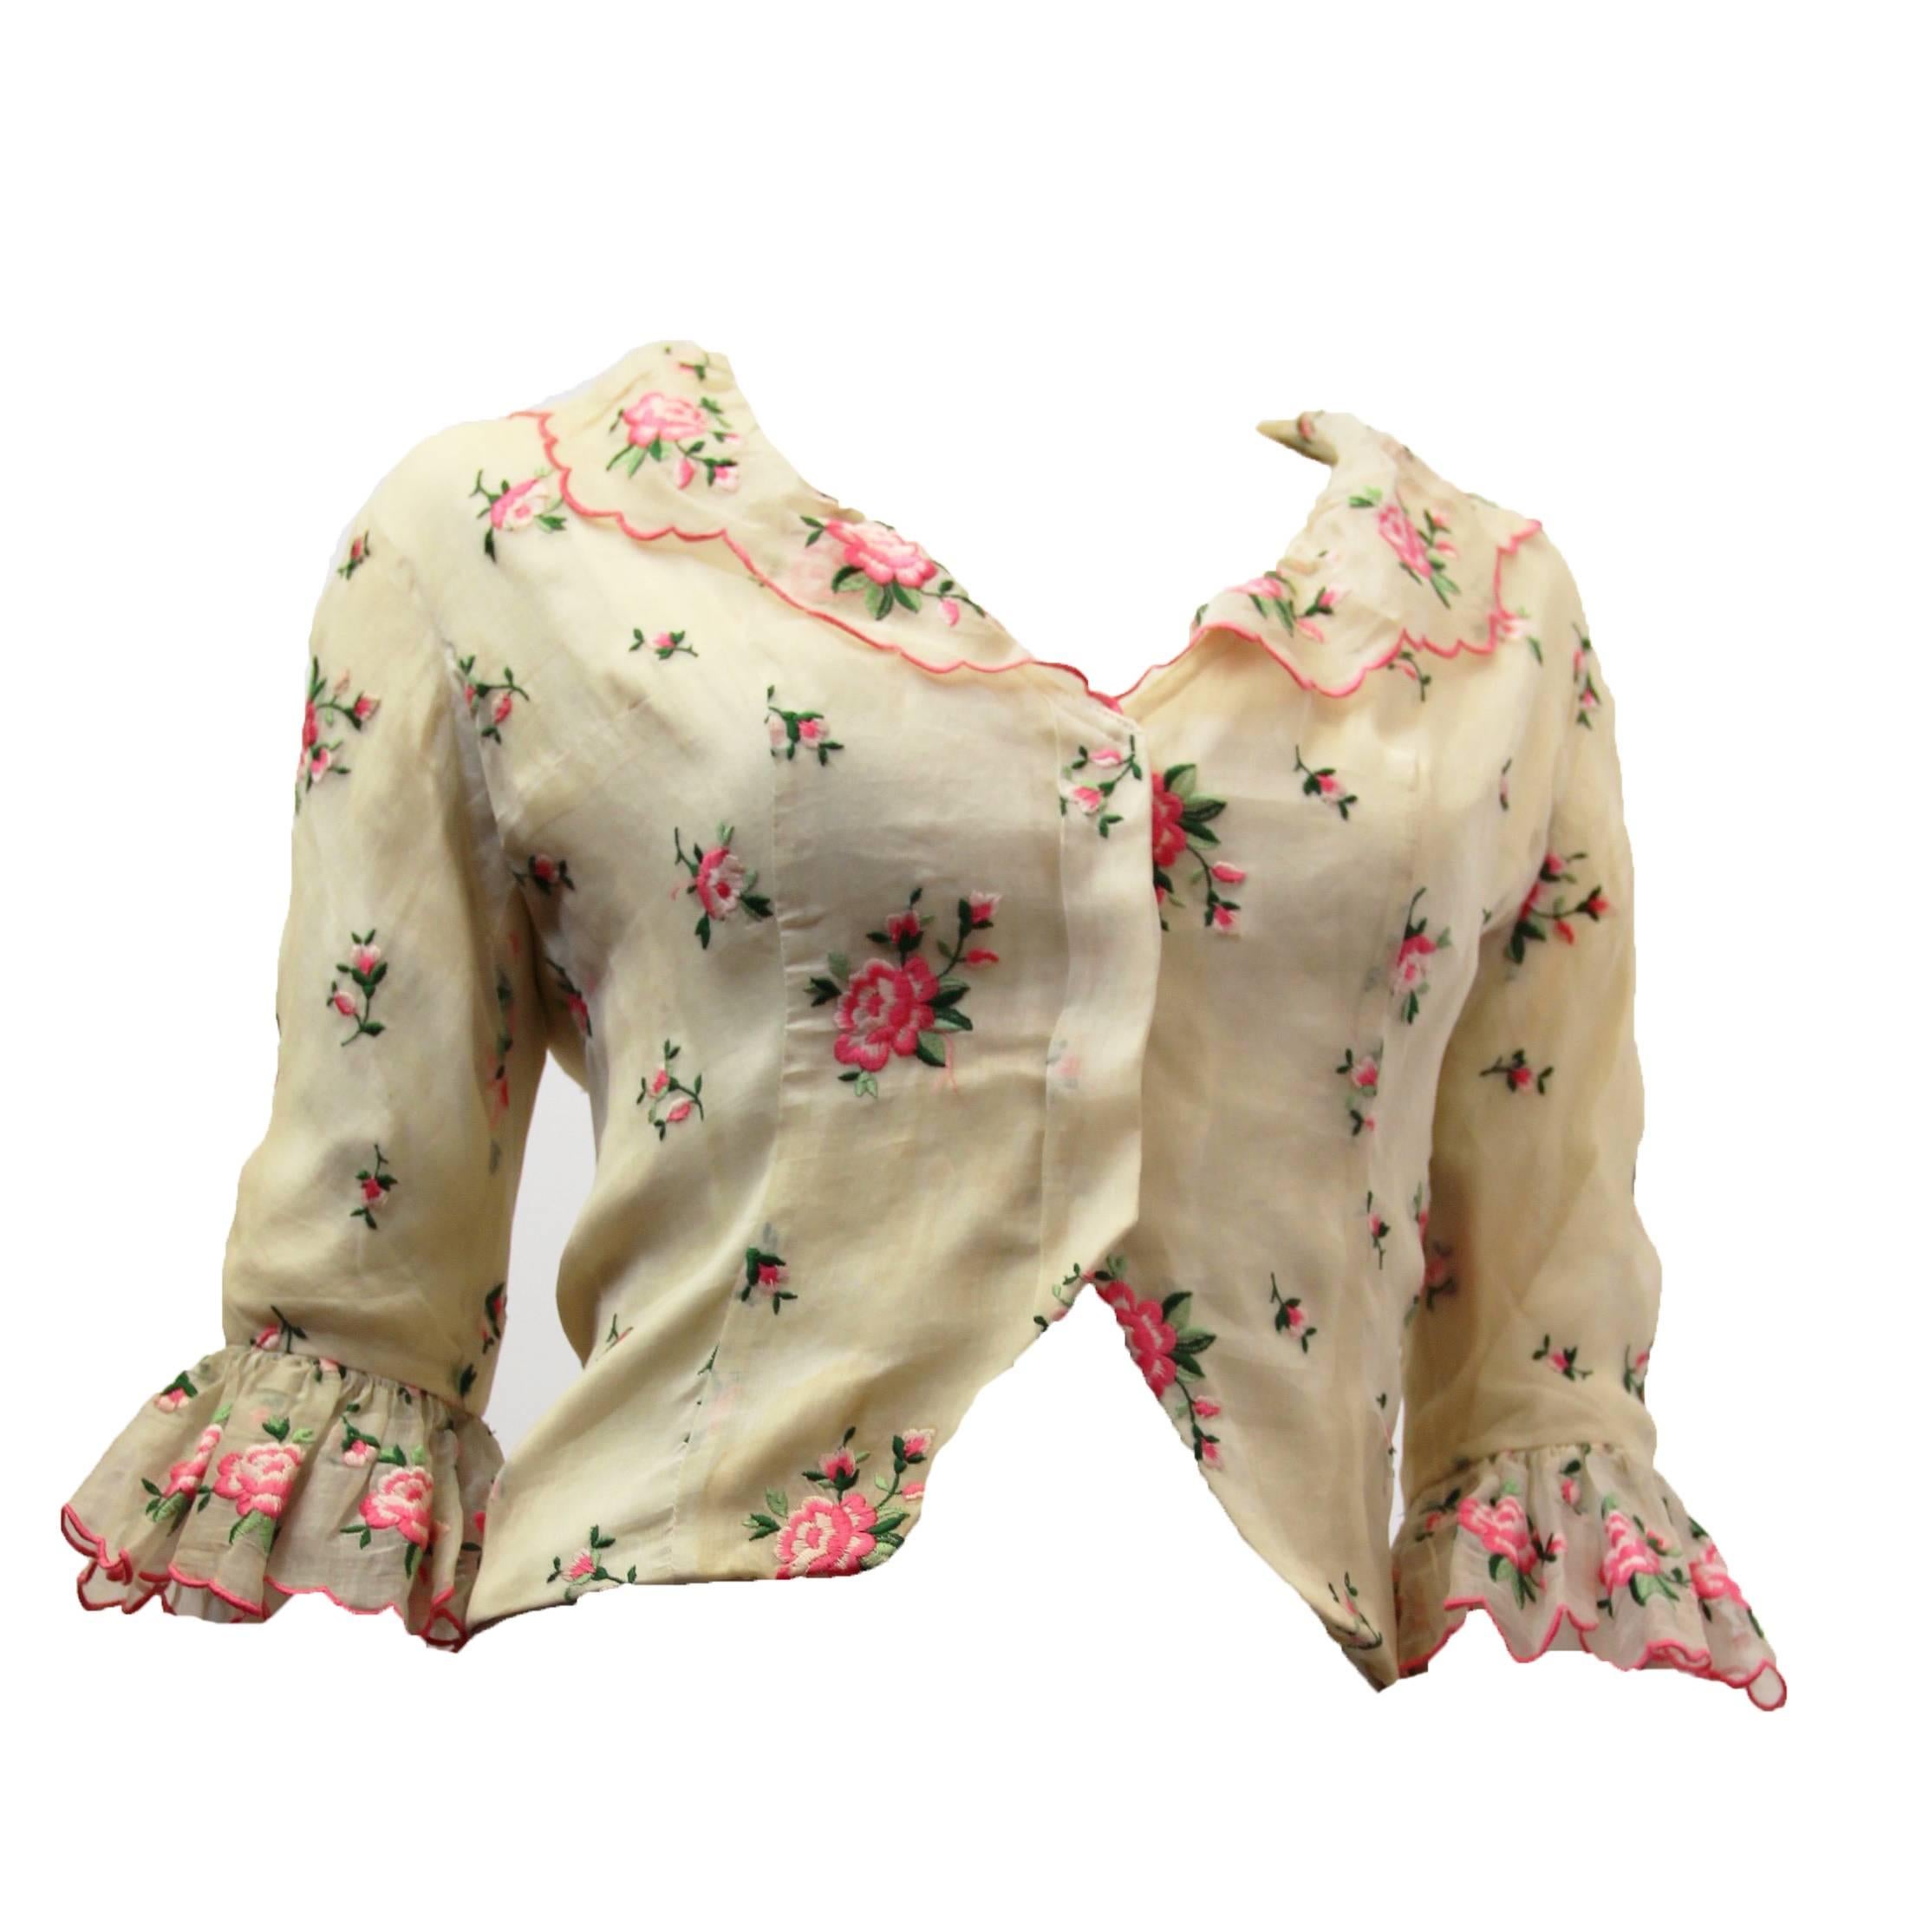 Beige 50s Castillo Organdy Rose Embroidered Blouse with Ruffle Collar and Cuffs